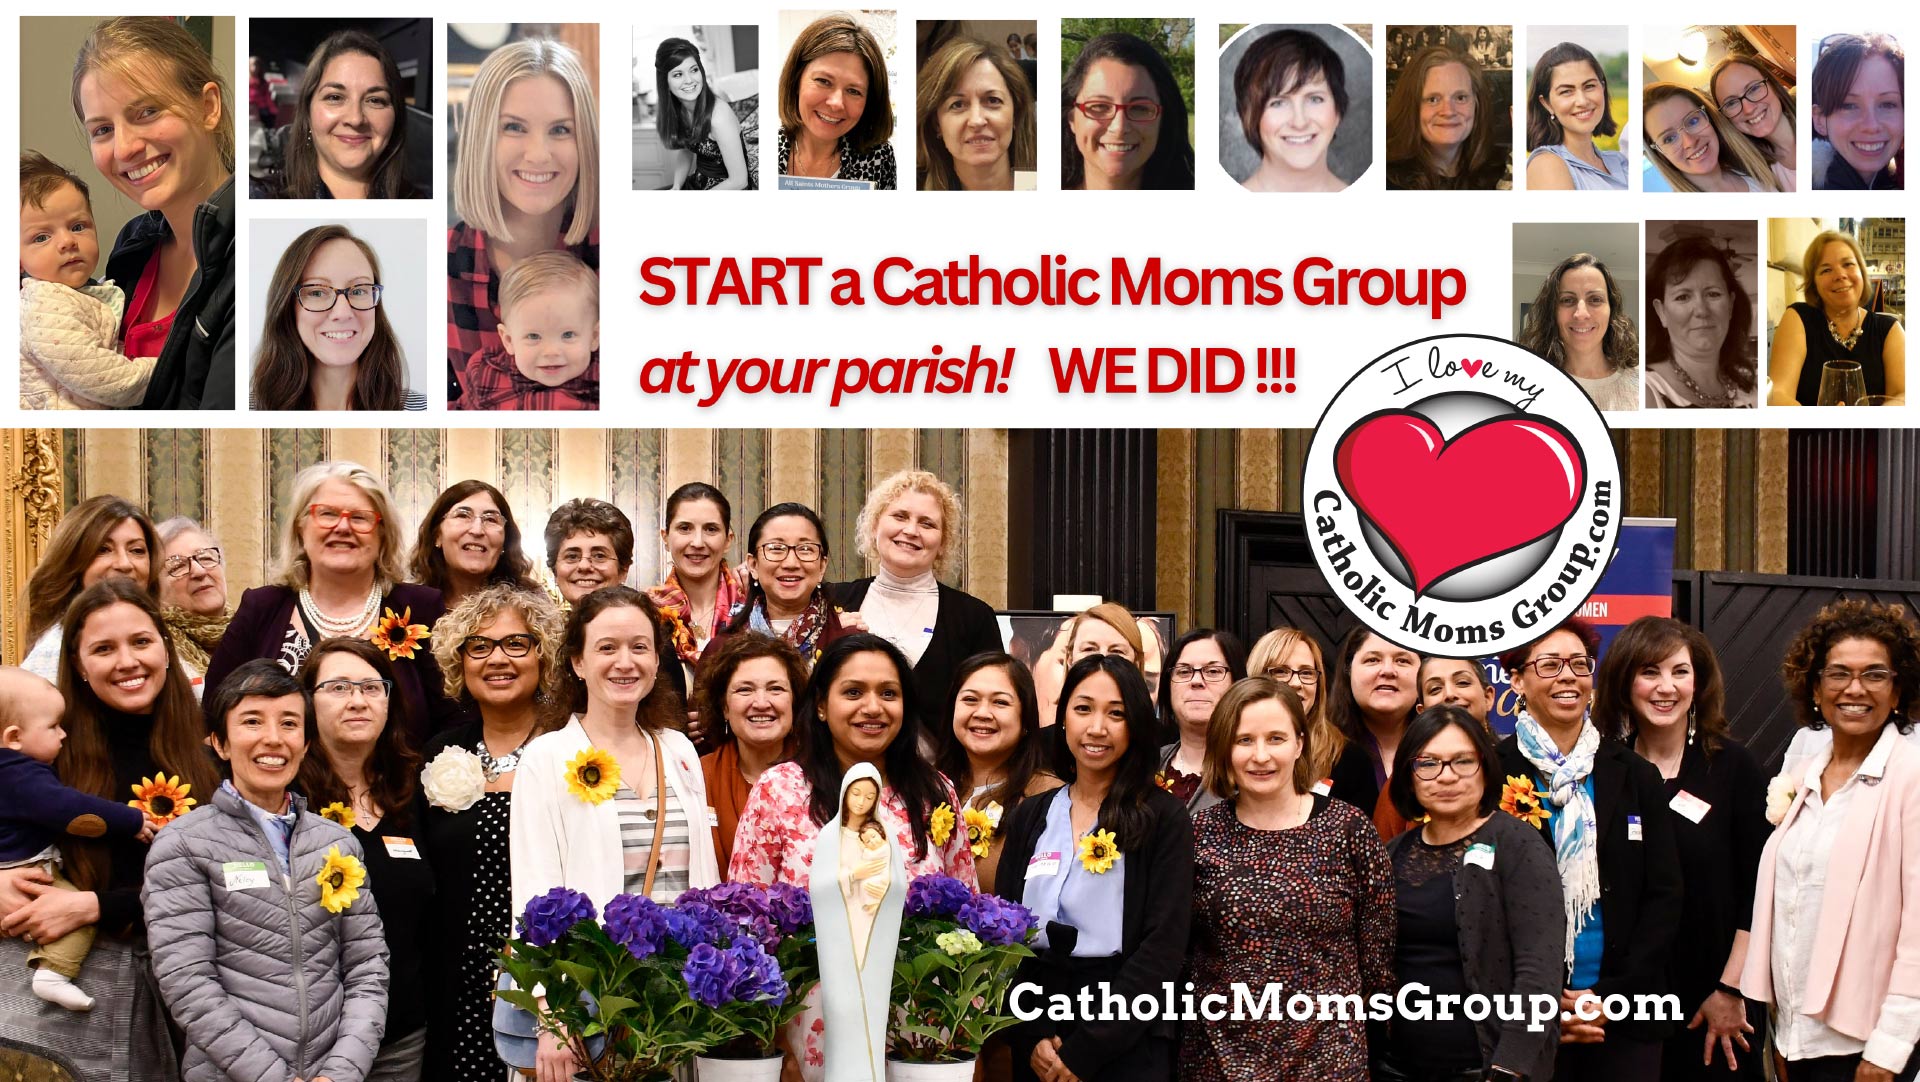 Catholic Moms Group Workshop How to Start a Mothers Group